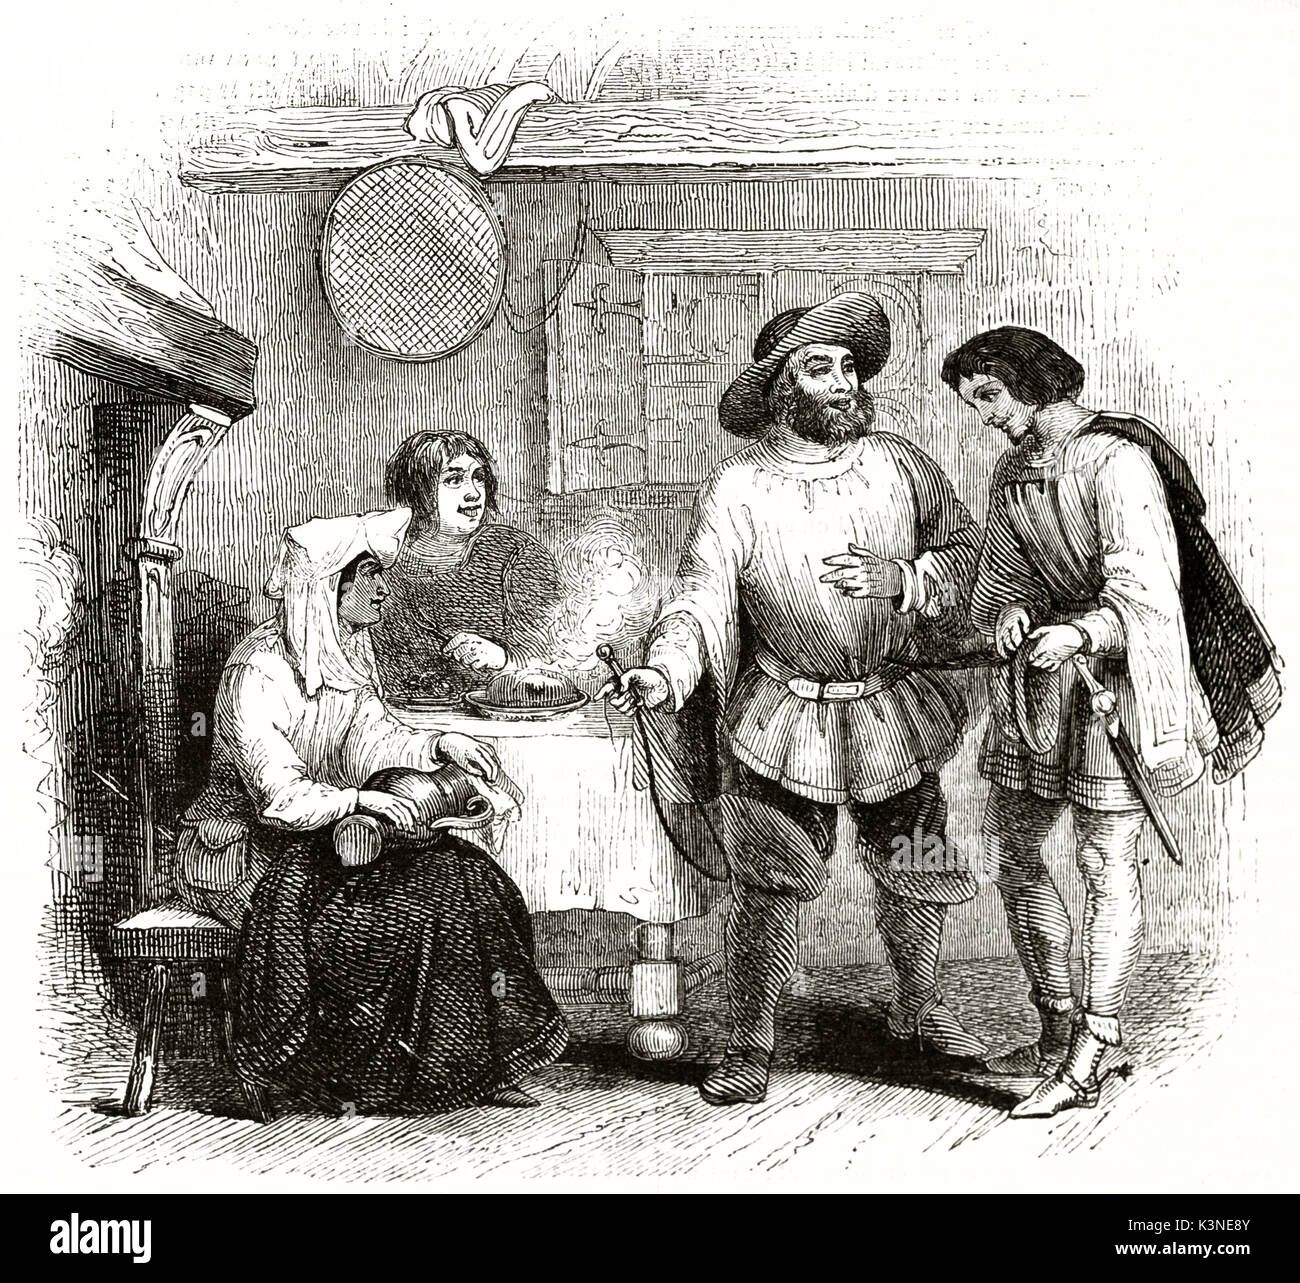 Old illustration depicting King Henry II of England, the miller of Mansfield (traditional ballad) and his family in their poor house. By unidentified author published on Magasin Pittoresque Paris 1839 Stock Photo